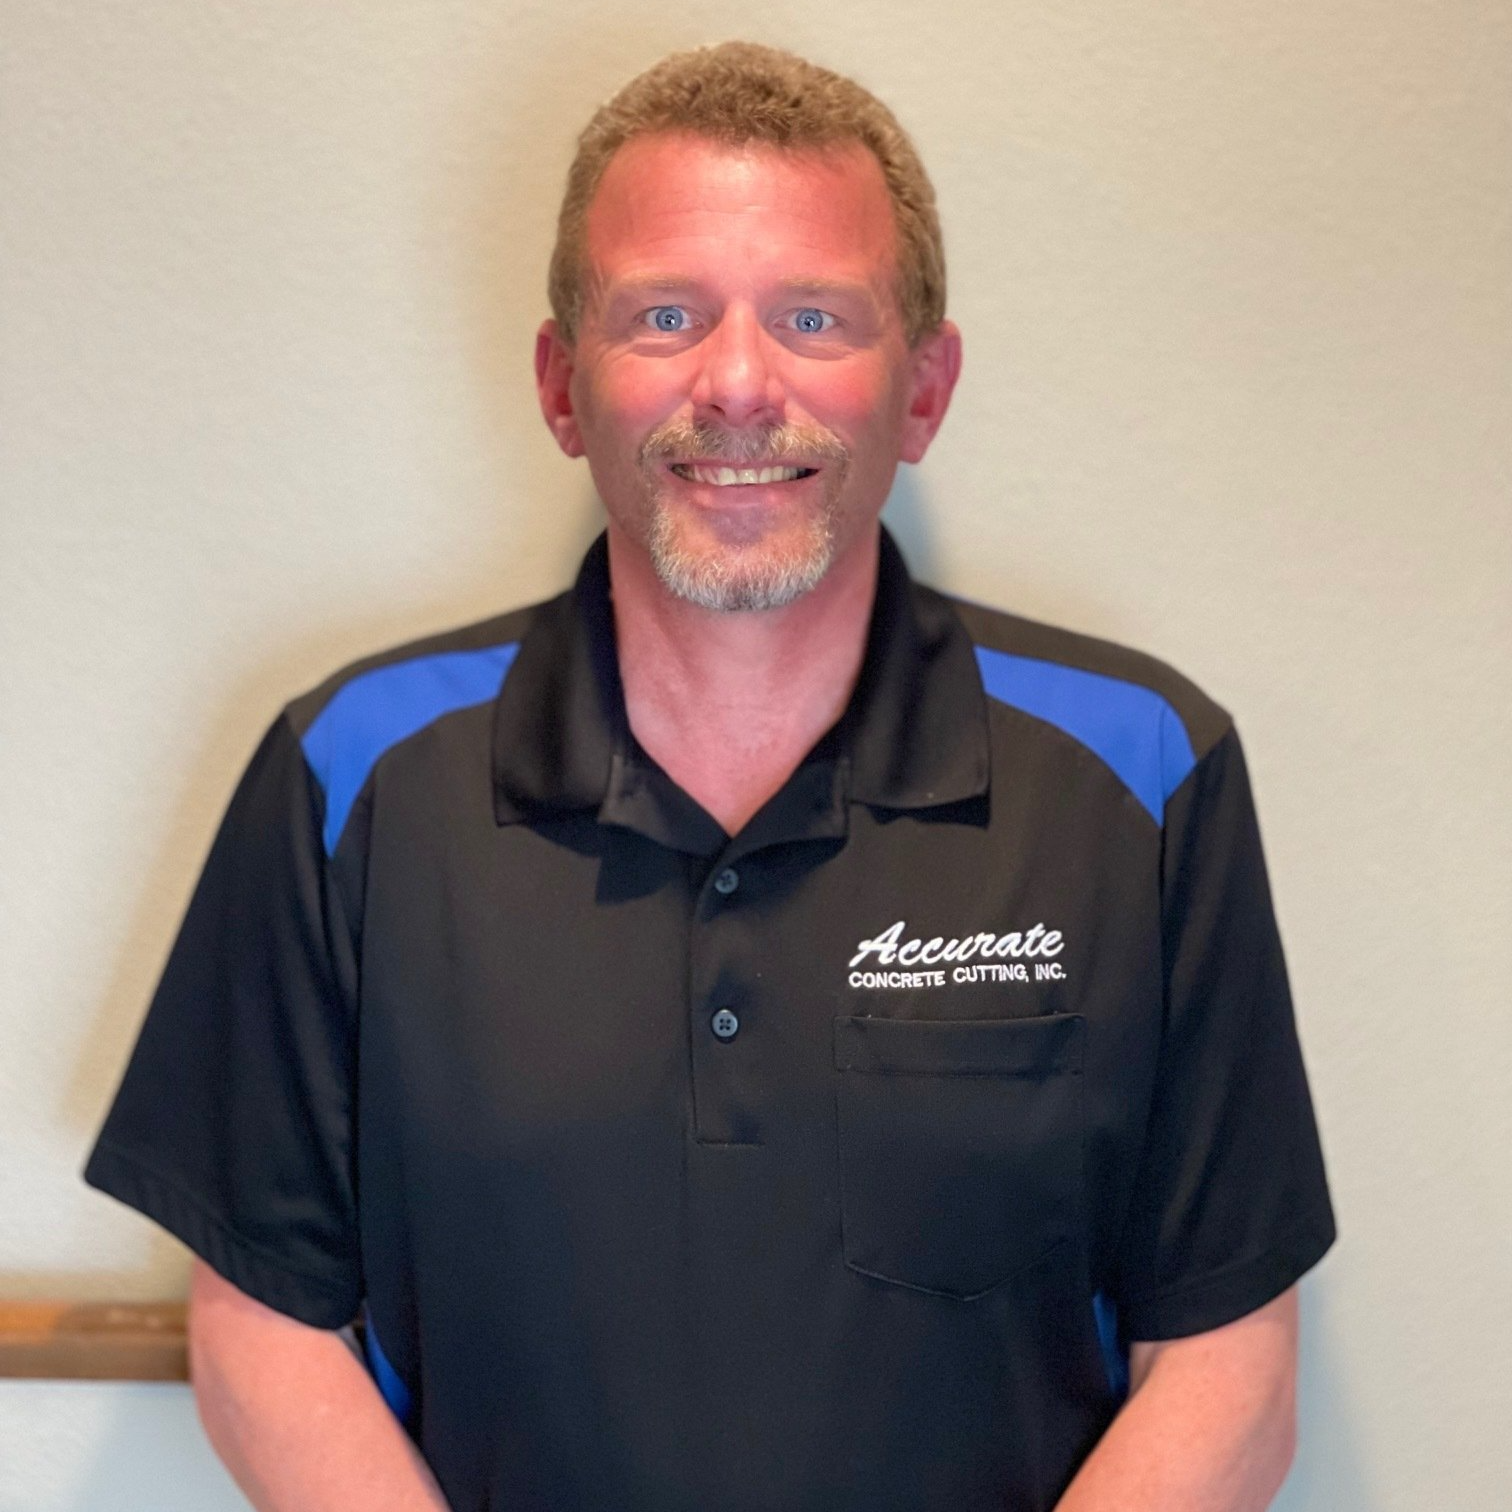 Vern Balkowitsch, Jr.  — Vancouver, WA — Accurate Concrete Cutting